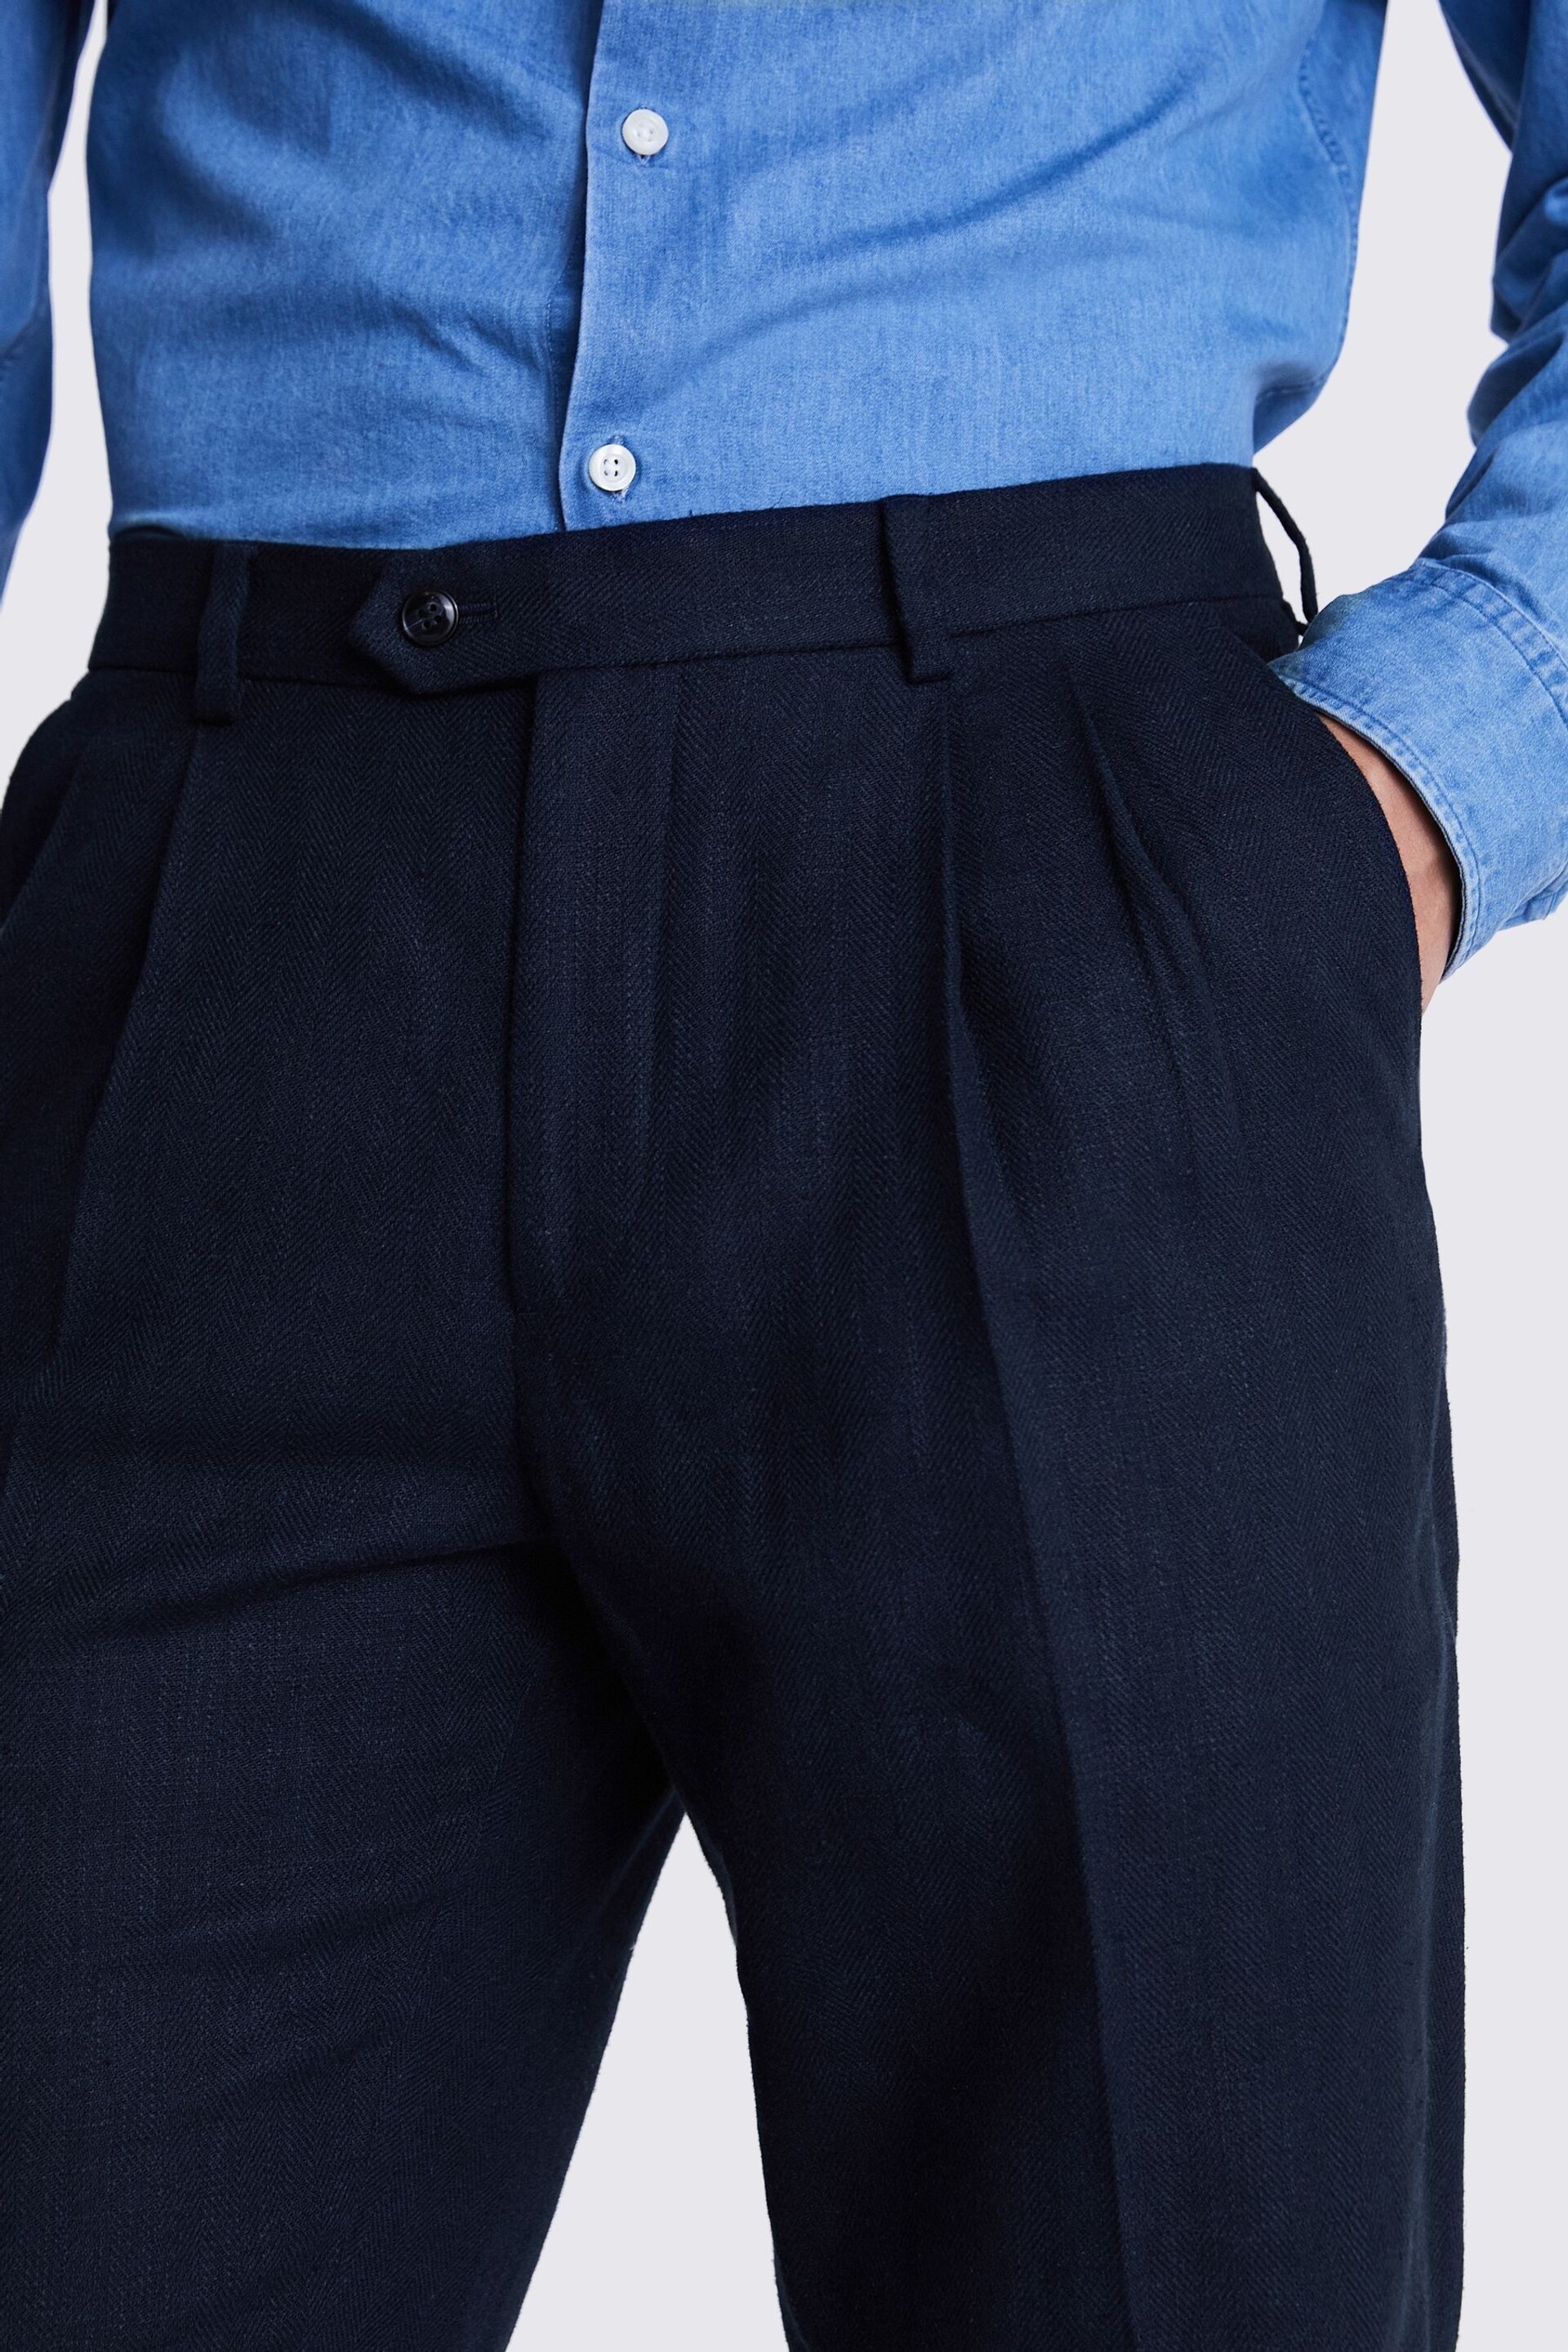 MOSS Blue Tailored Fit Herringbone Trousers - Image 3 of 3